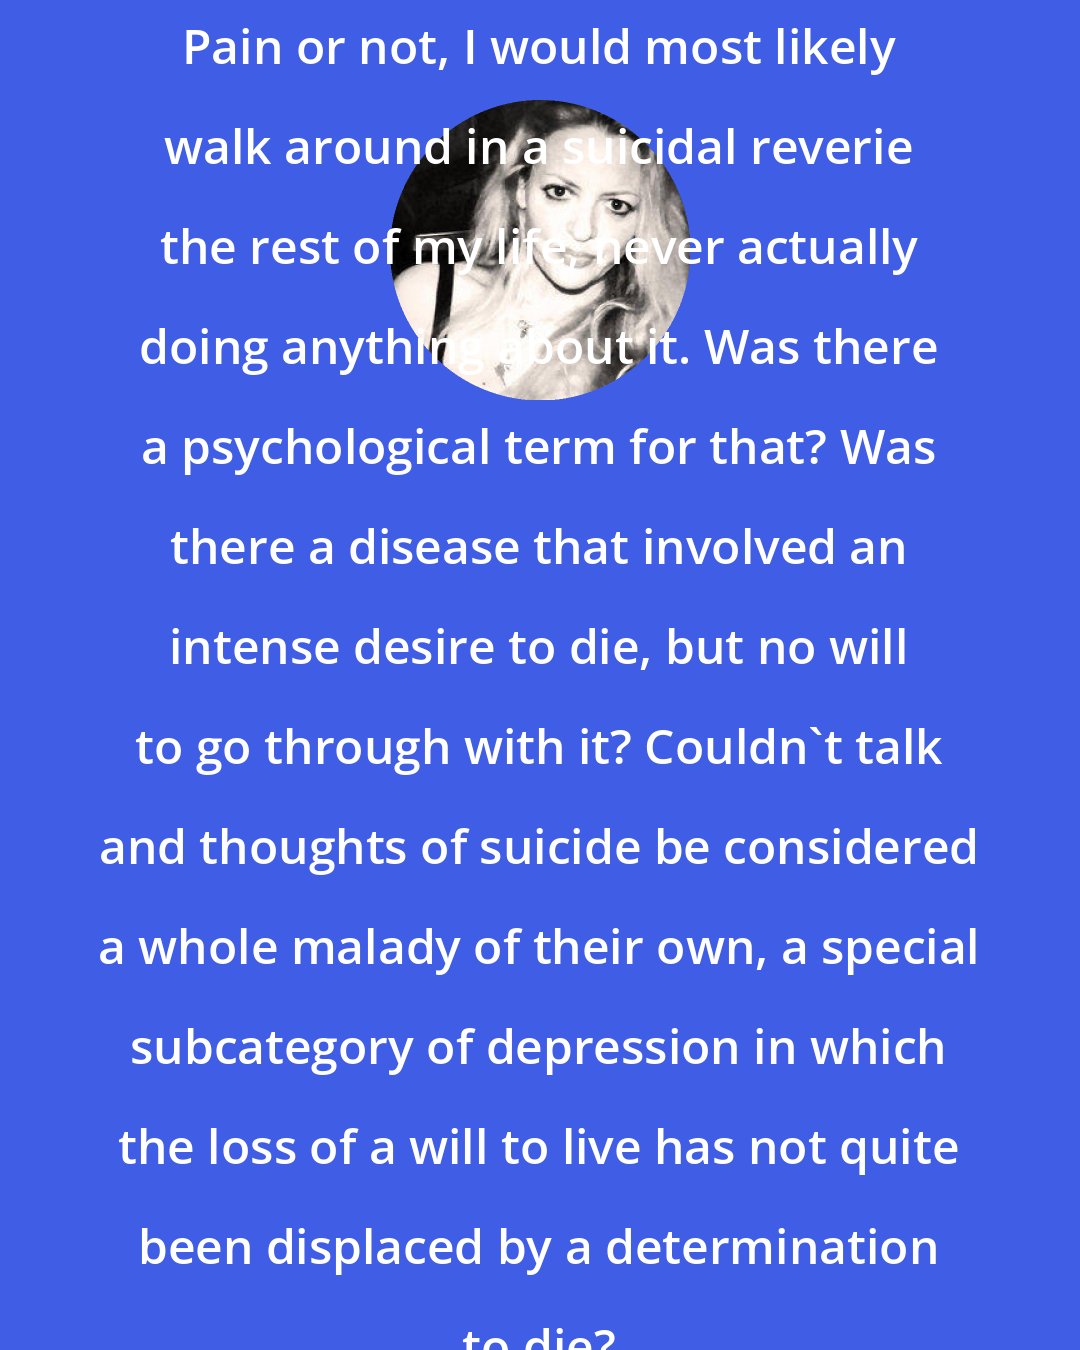 Elizabeth Wurtzel: Pain or not, I would most likely walk around in a suicidal reverie the rest of my life, never actually doing anything about it. Was there a psychological term for that? Was there a disease that involved an intense desire to die, but no will to go through with it? Couldn't talk and thoughts of suicide be considered a whole malady of their own, a special subcategory of depression in which the loss of a will to live has not quite been displaced by a determination to die?